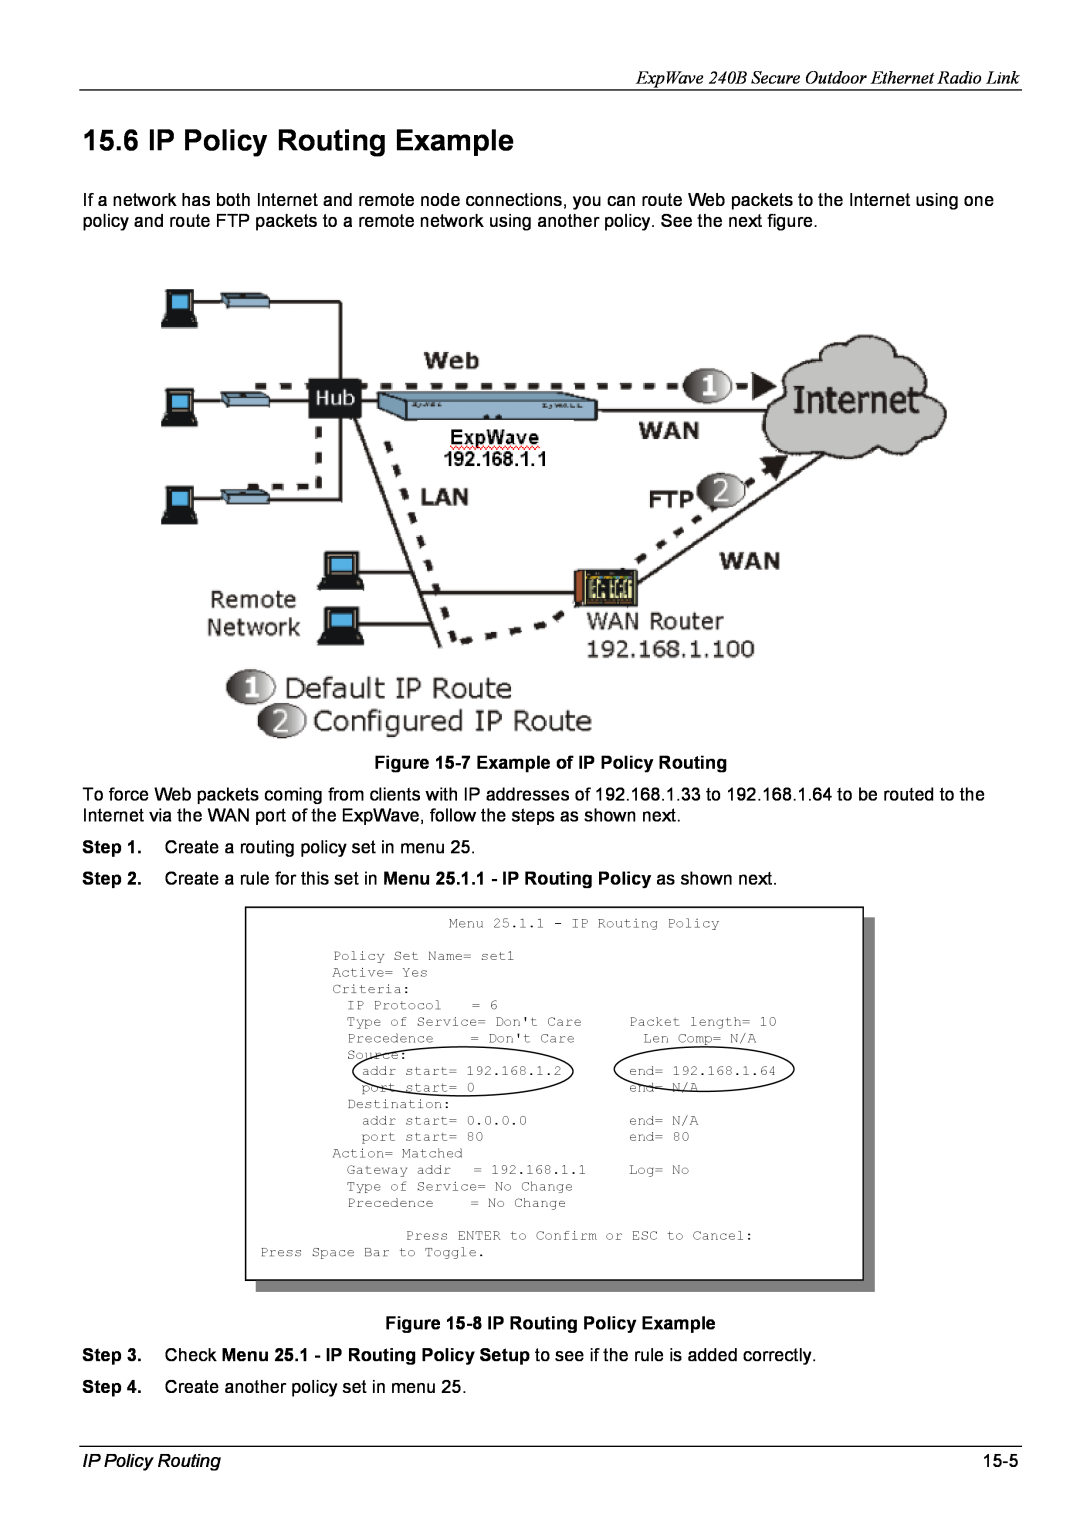 ZyXEL Communications manual IP Policy Routing Example, ExpWave 240B Secure Outdoor Ethernet Radio Link, 15-5 